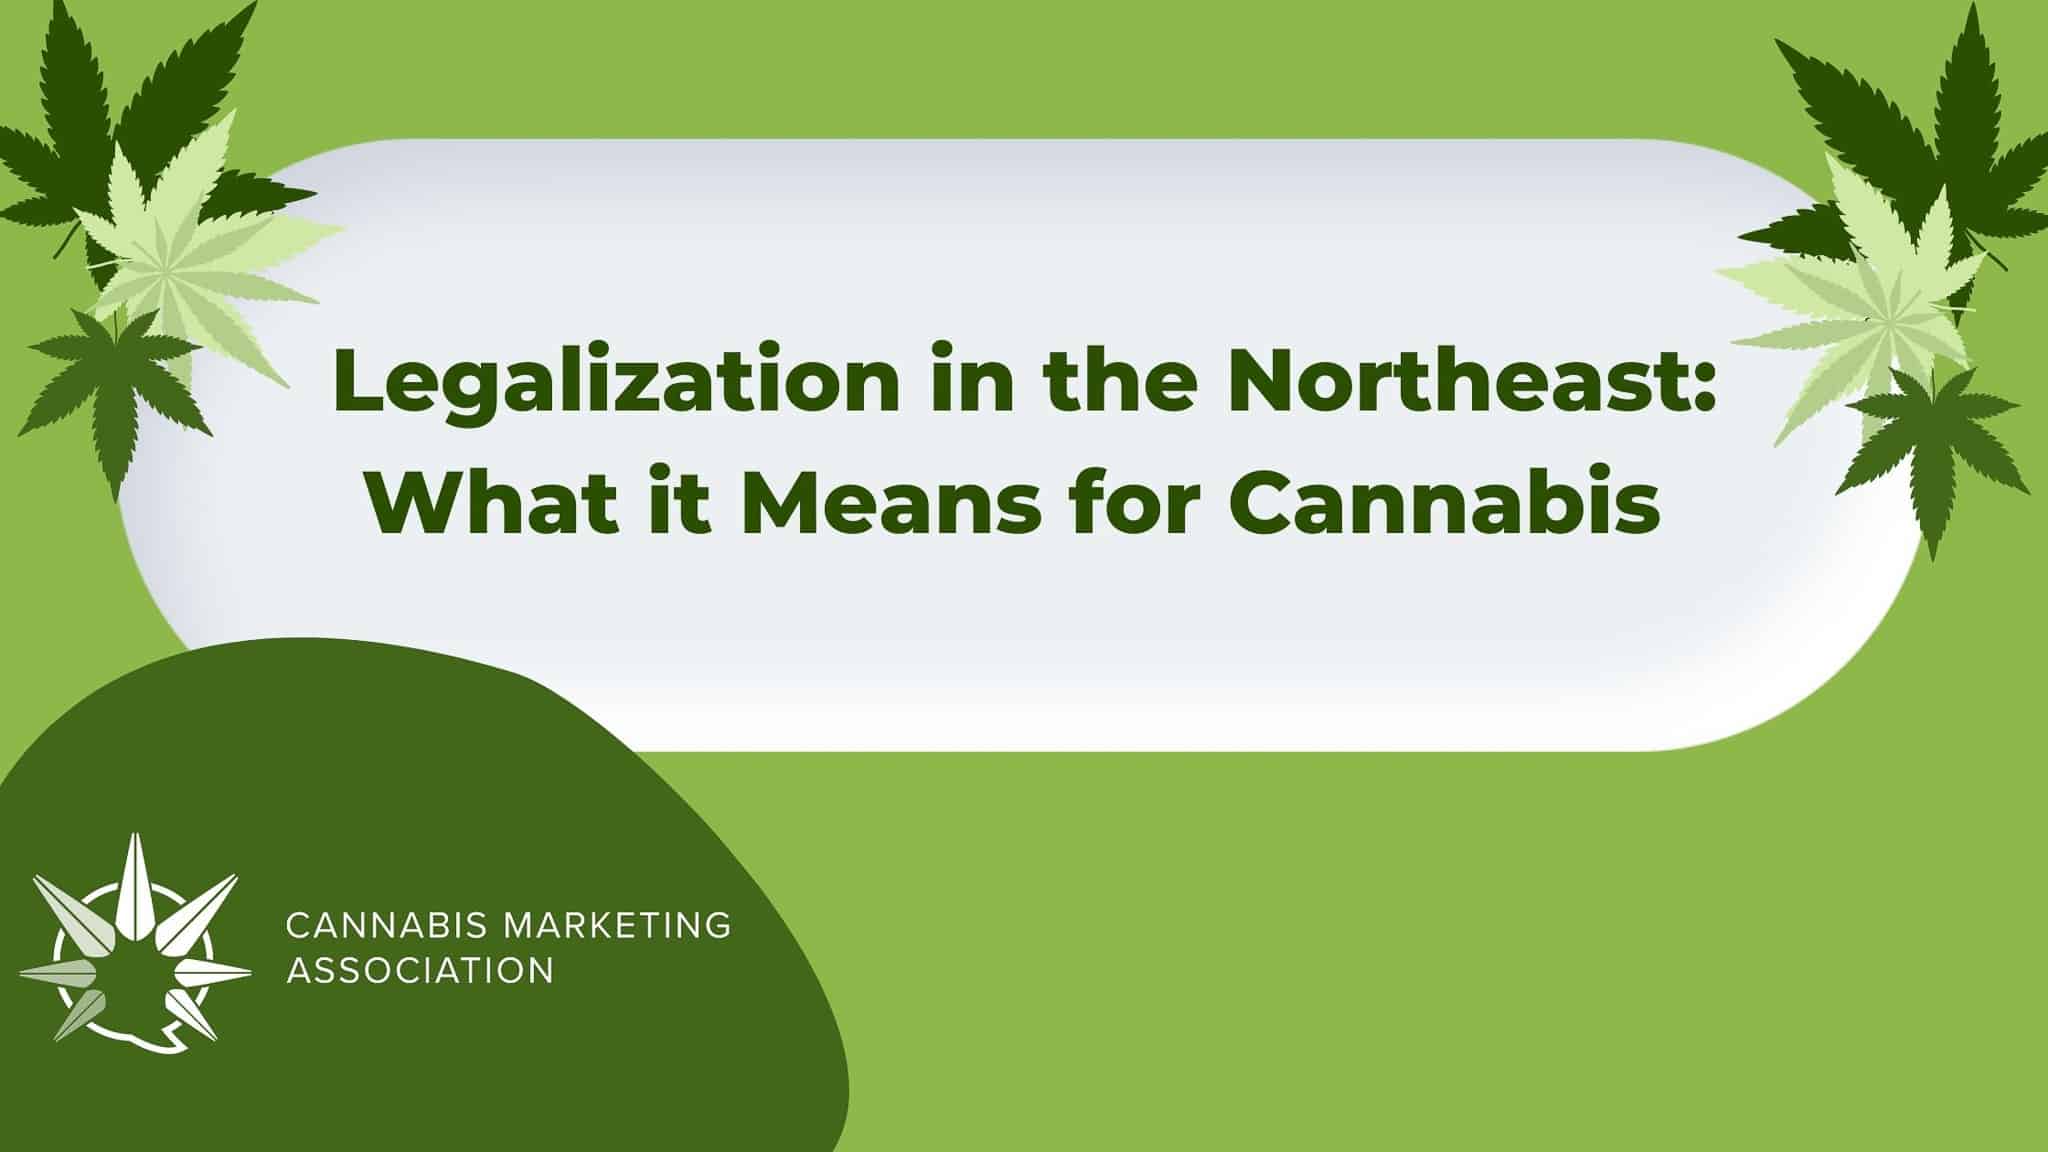 Cannabis Legalization in the Northeast